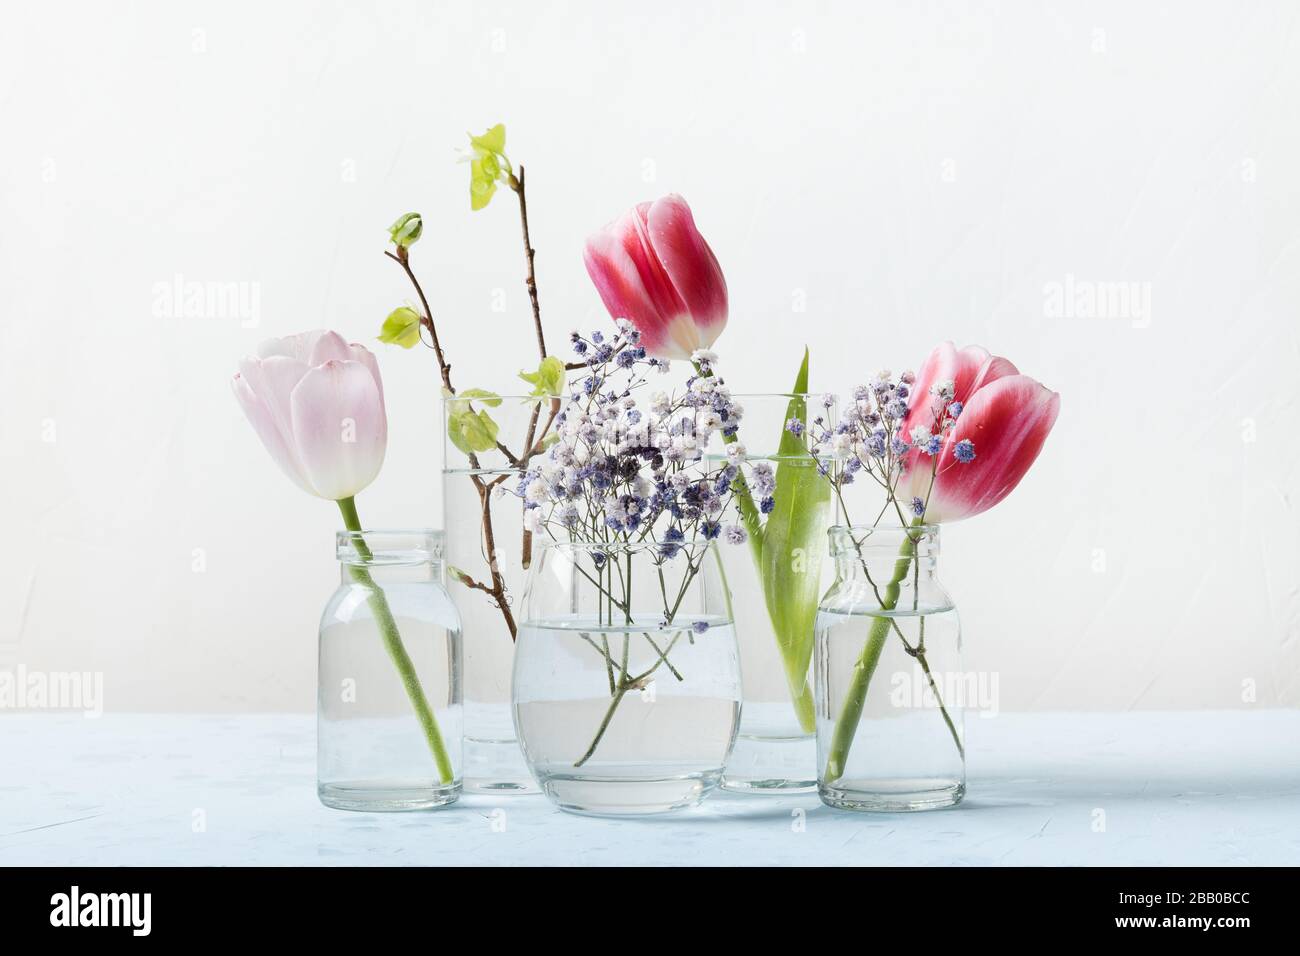 Pink tulip and fresh birch branches distorted through liquid water in glasses on light background. Close up. Spring decor. Stock Photo